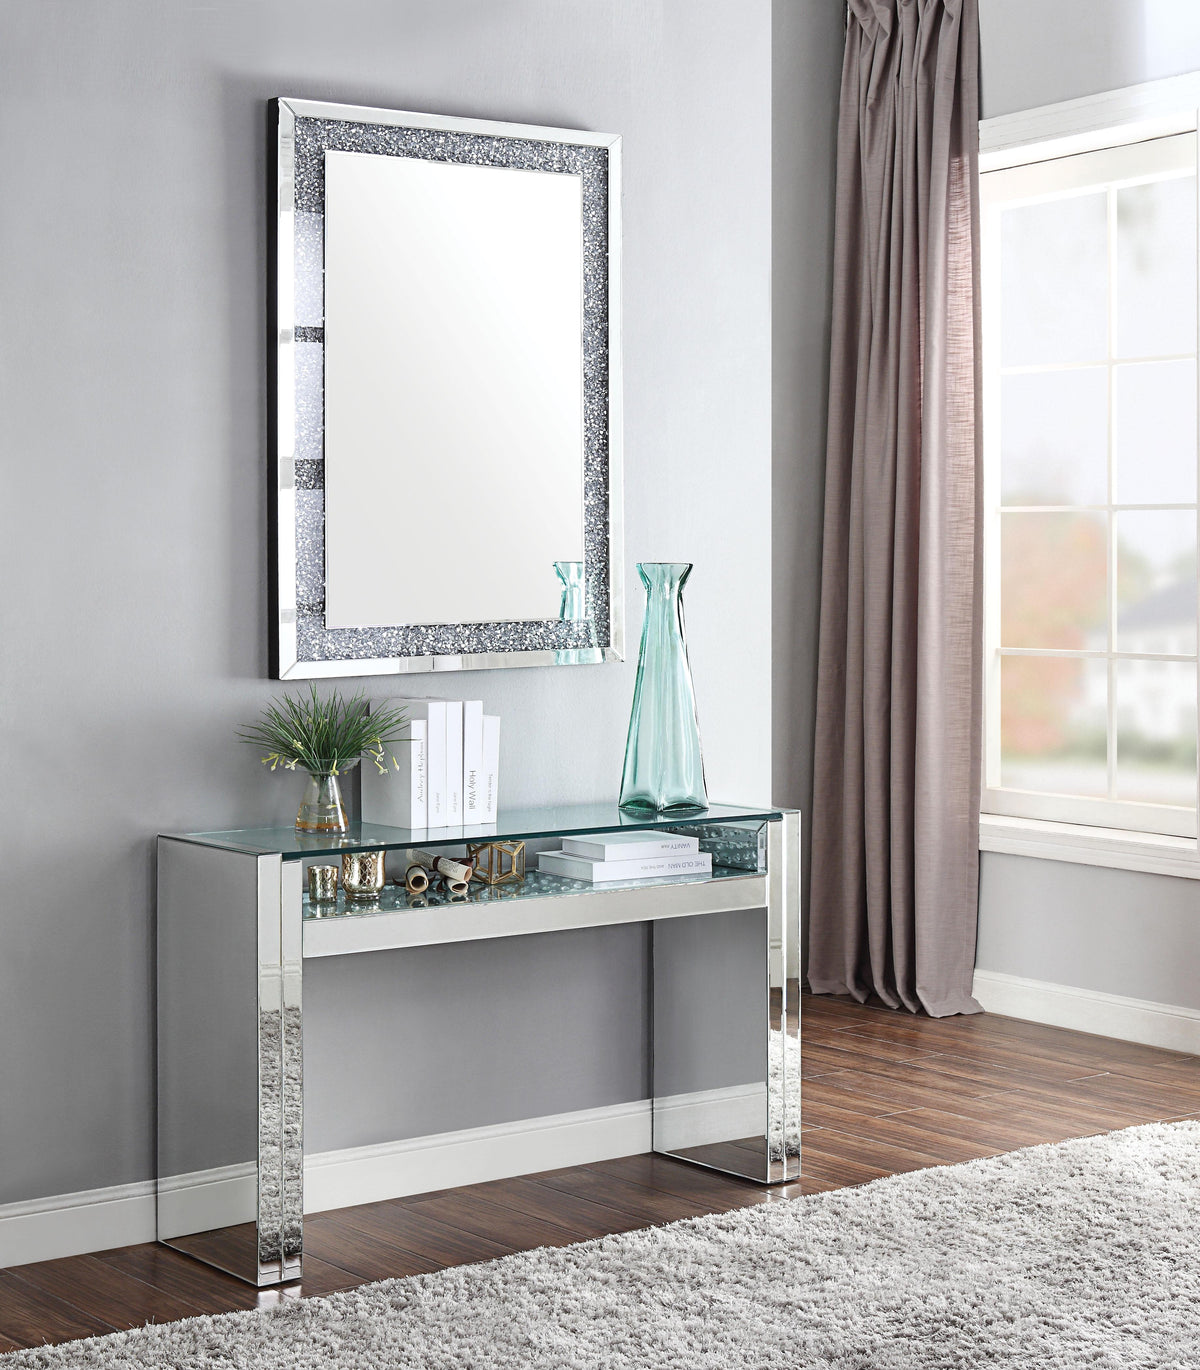 Acme Furniture Nysa Sofa Table in Mirrored & Faux Crystals 81473  Las Vegas Furniture Stores